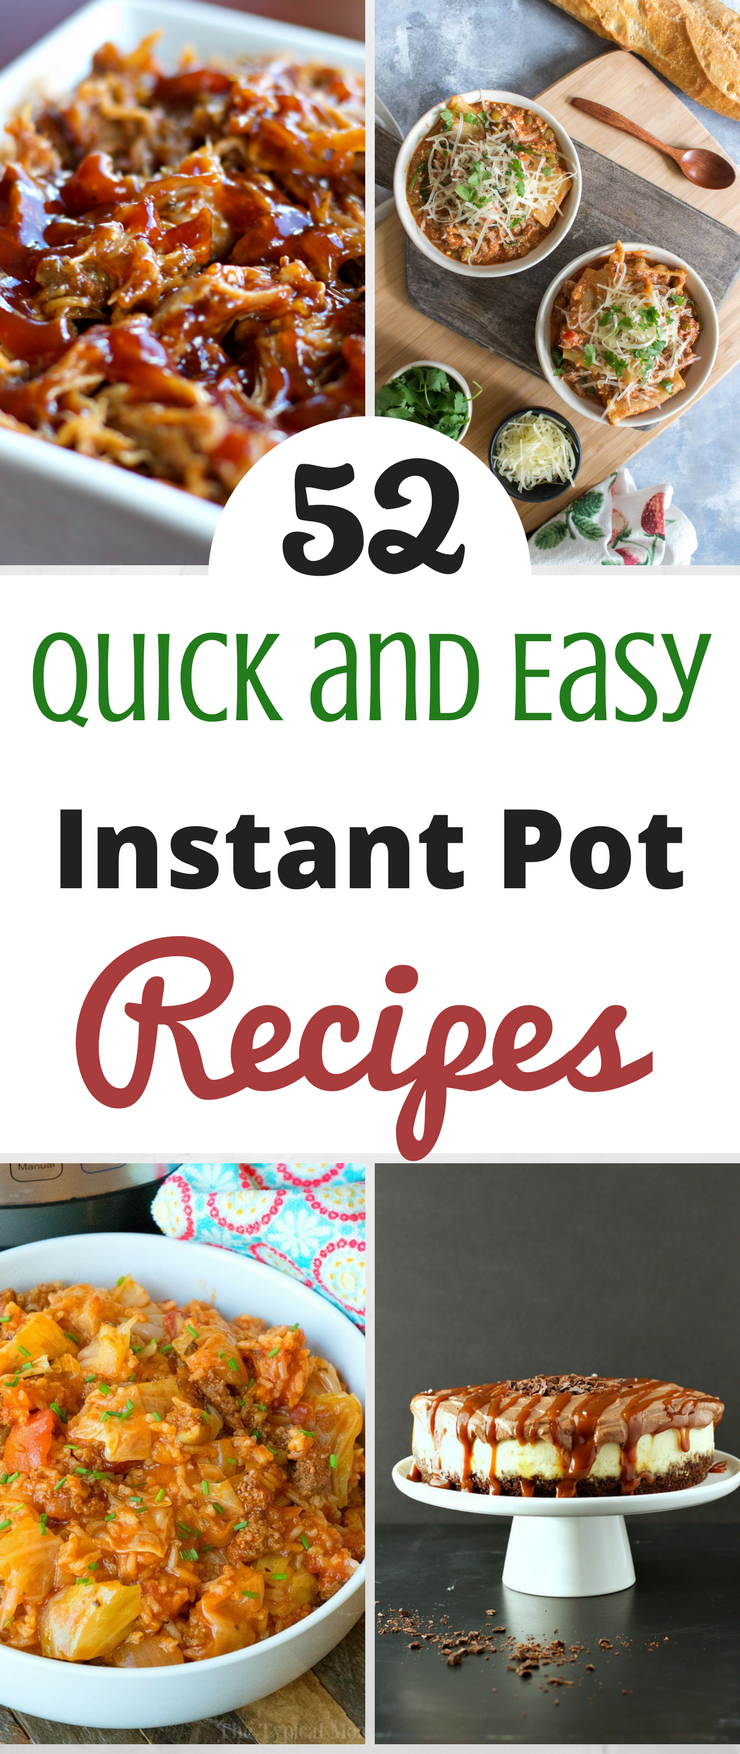 52 Quick and Easy Instant Pot Recipes